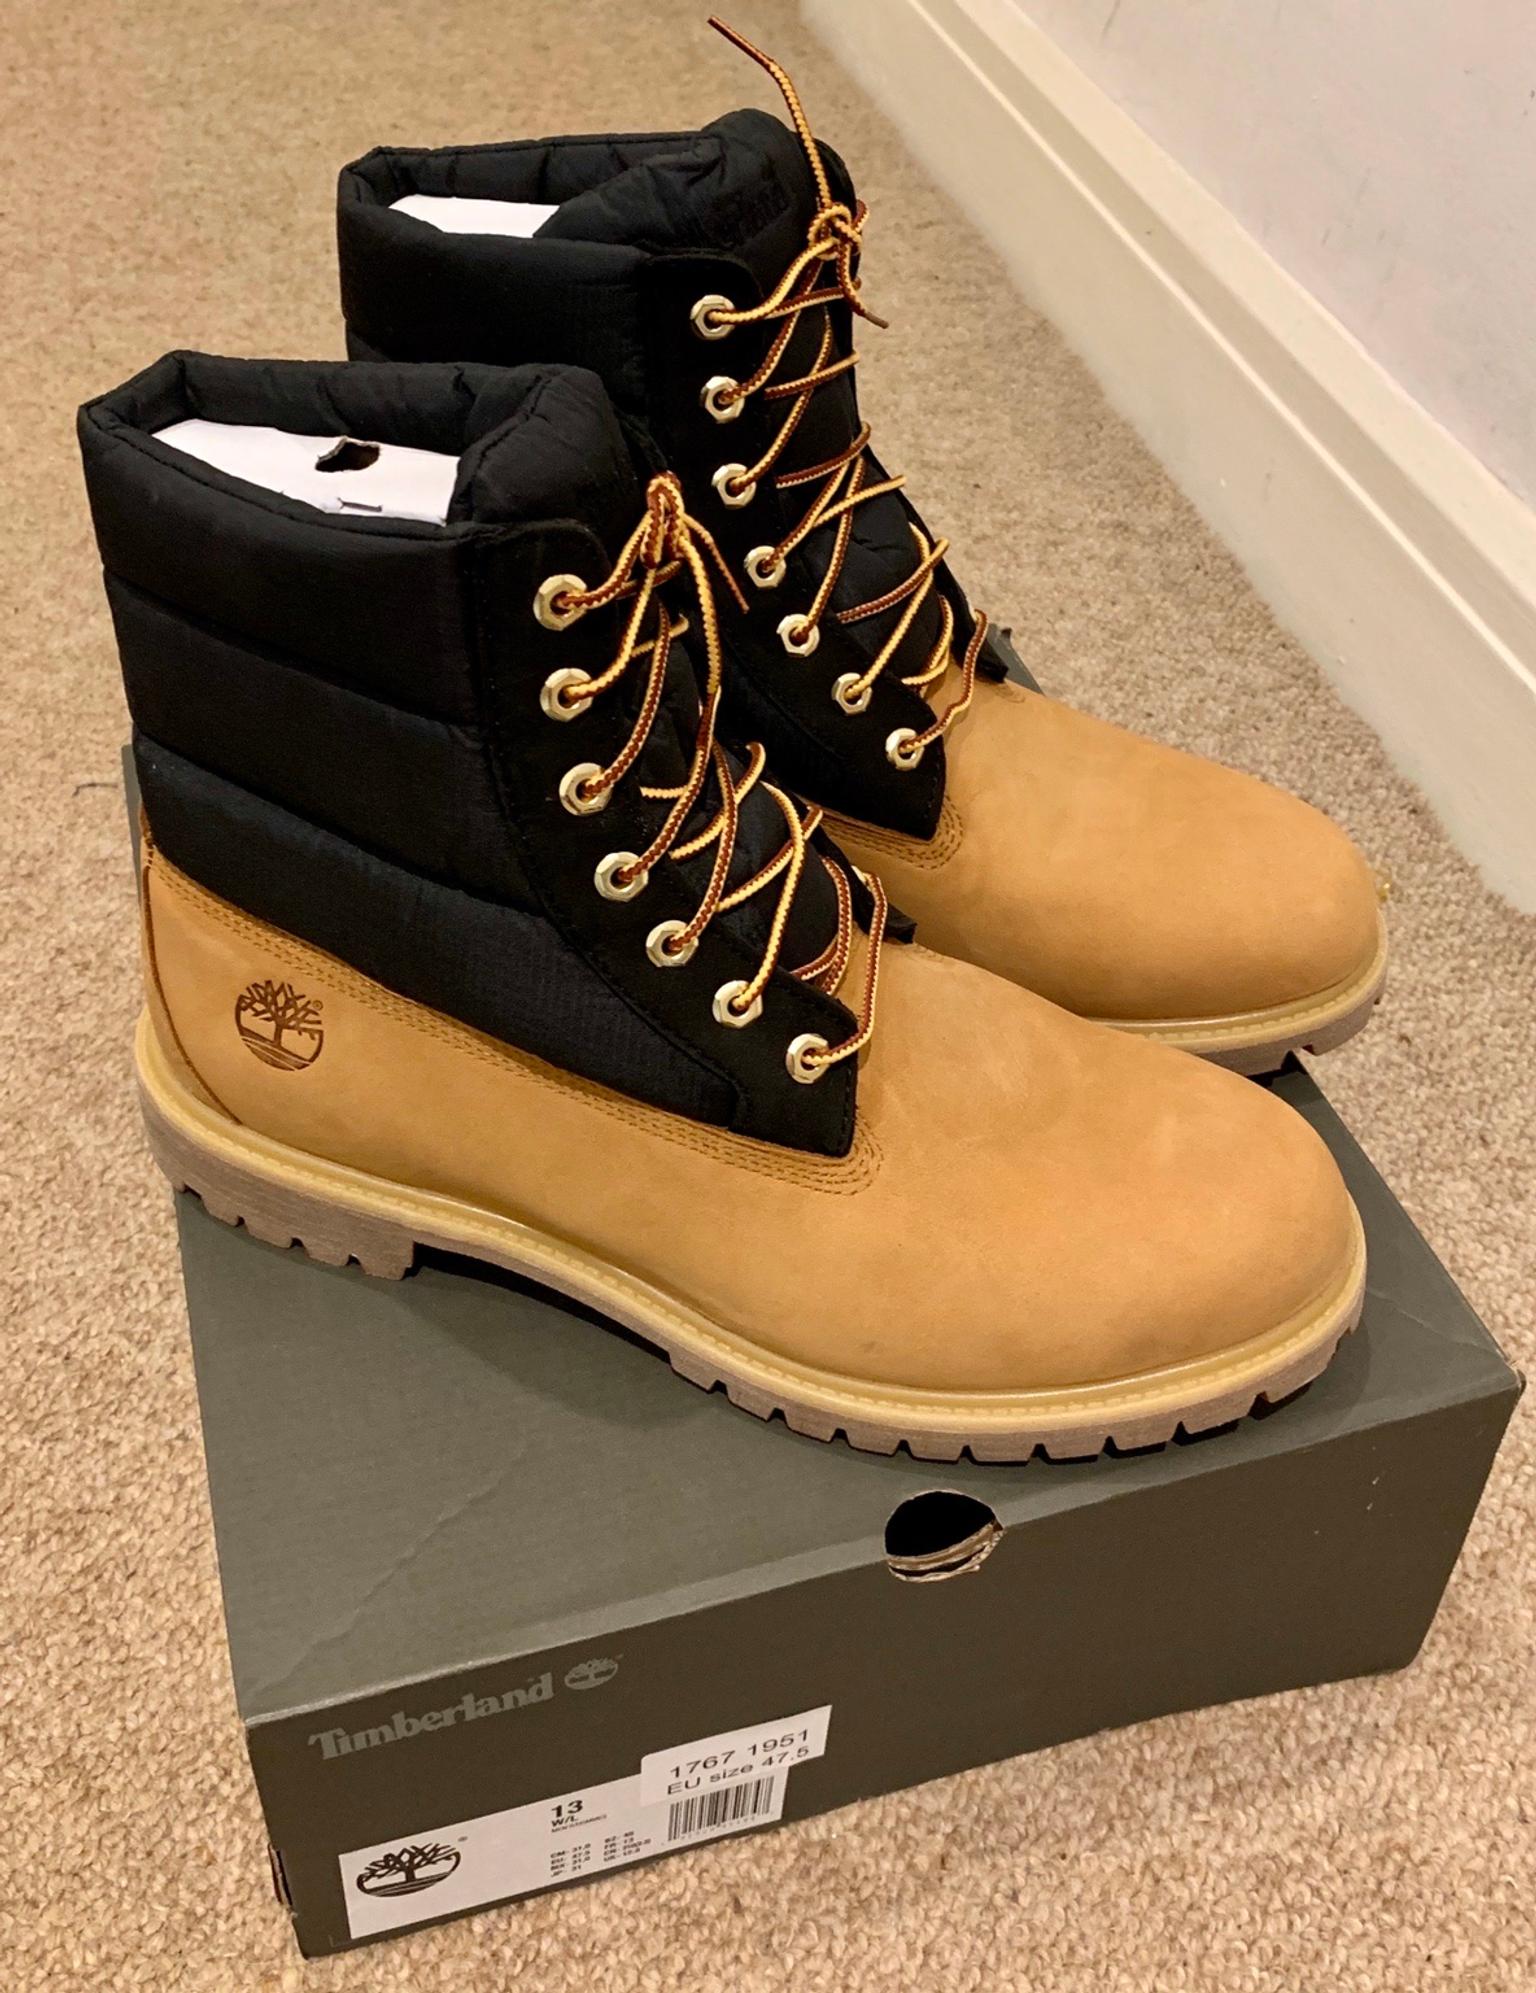 mens timberland boots size 12.5